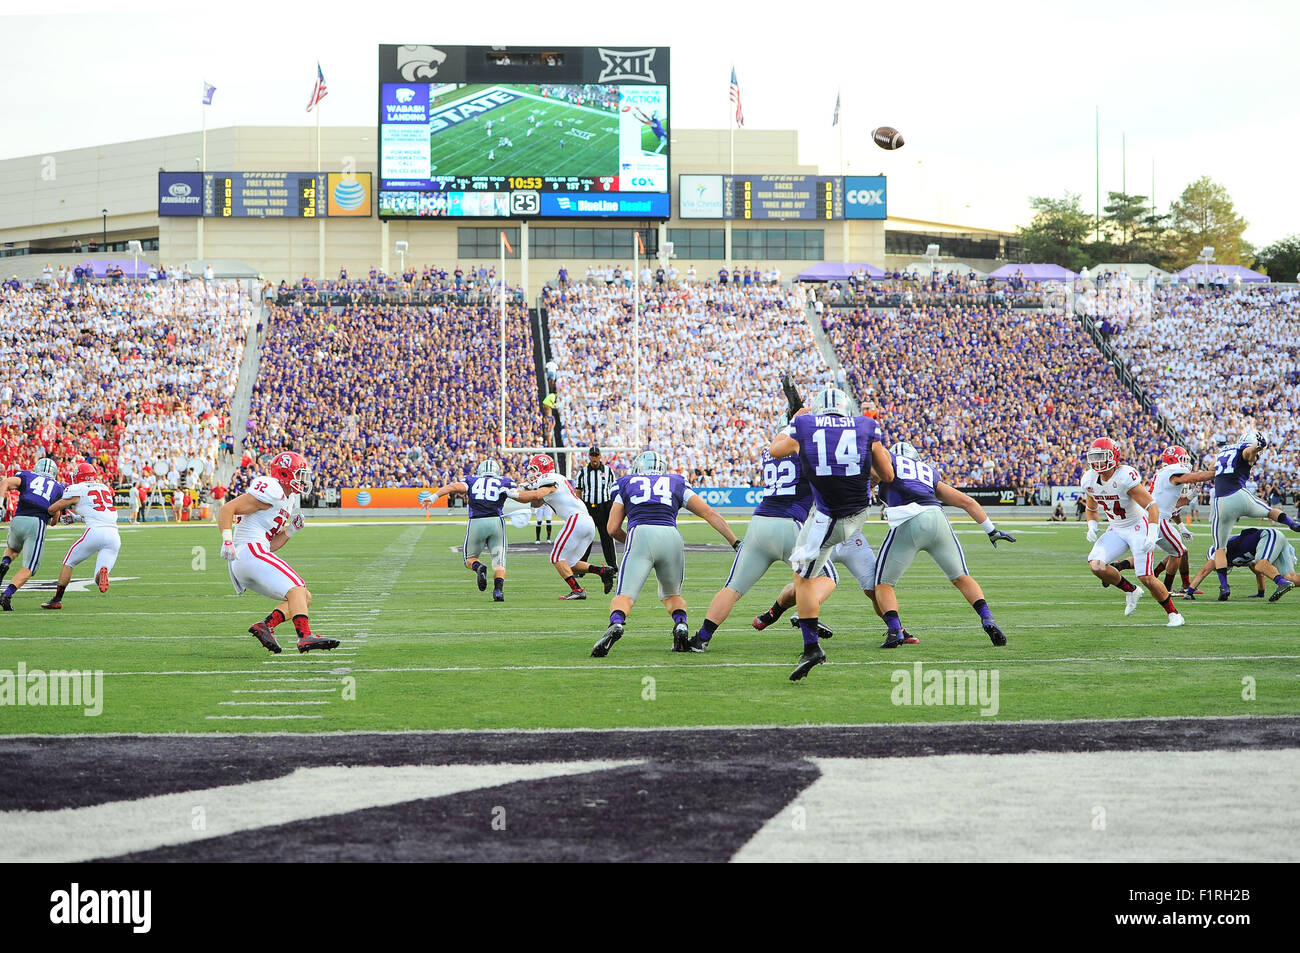 Manhattan, Kansas, USA. 05th Sep, 2015. Kansas State Wildcats punter Nick Walsh (14) punts the ball in the first half against the backdrop of the Vanier Family Football Complex during the NCAA Football game between South Dakota Coyotes and Kansas State at Bill Snyder Family Stadium in Manhattan, Kansas. Kendall Shaw/CSM/Alamy Live News Stock Photo